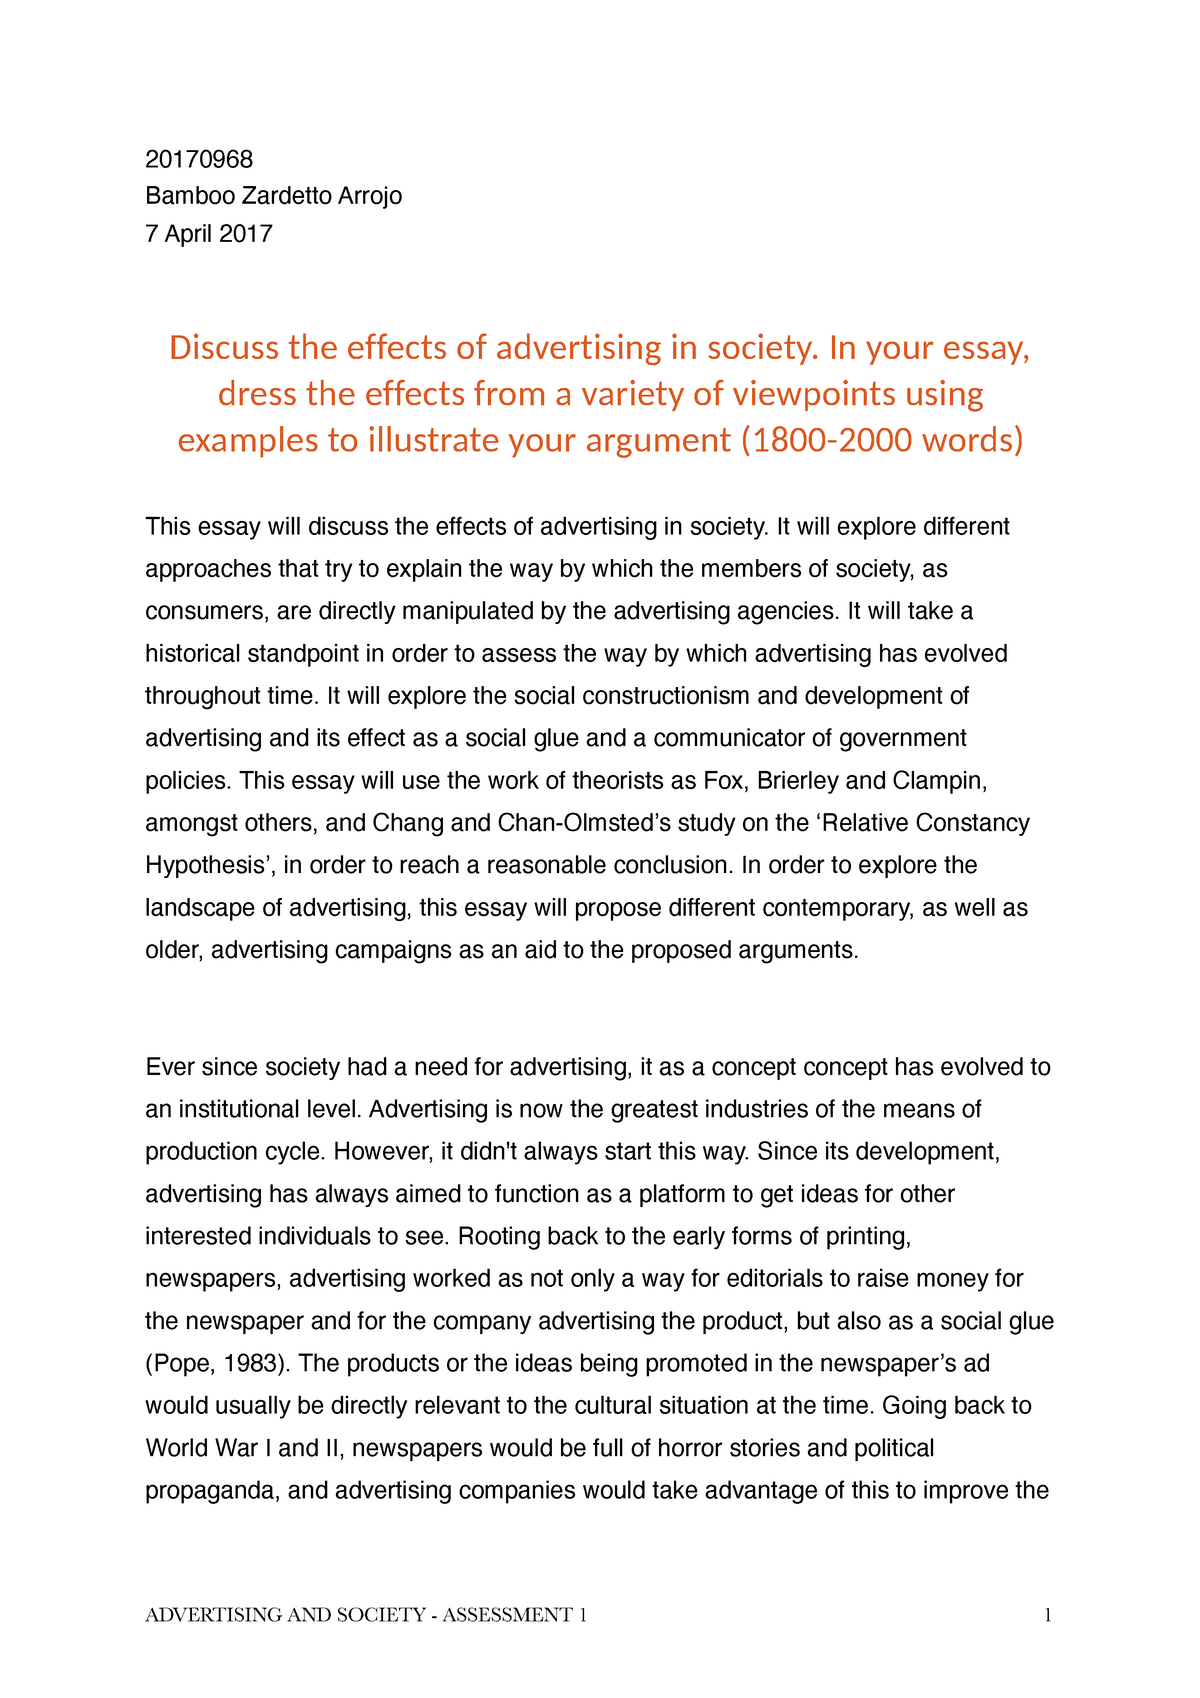 essay on harmful effects of advertising